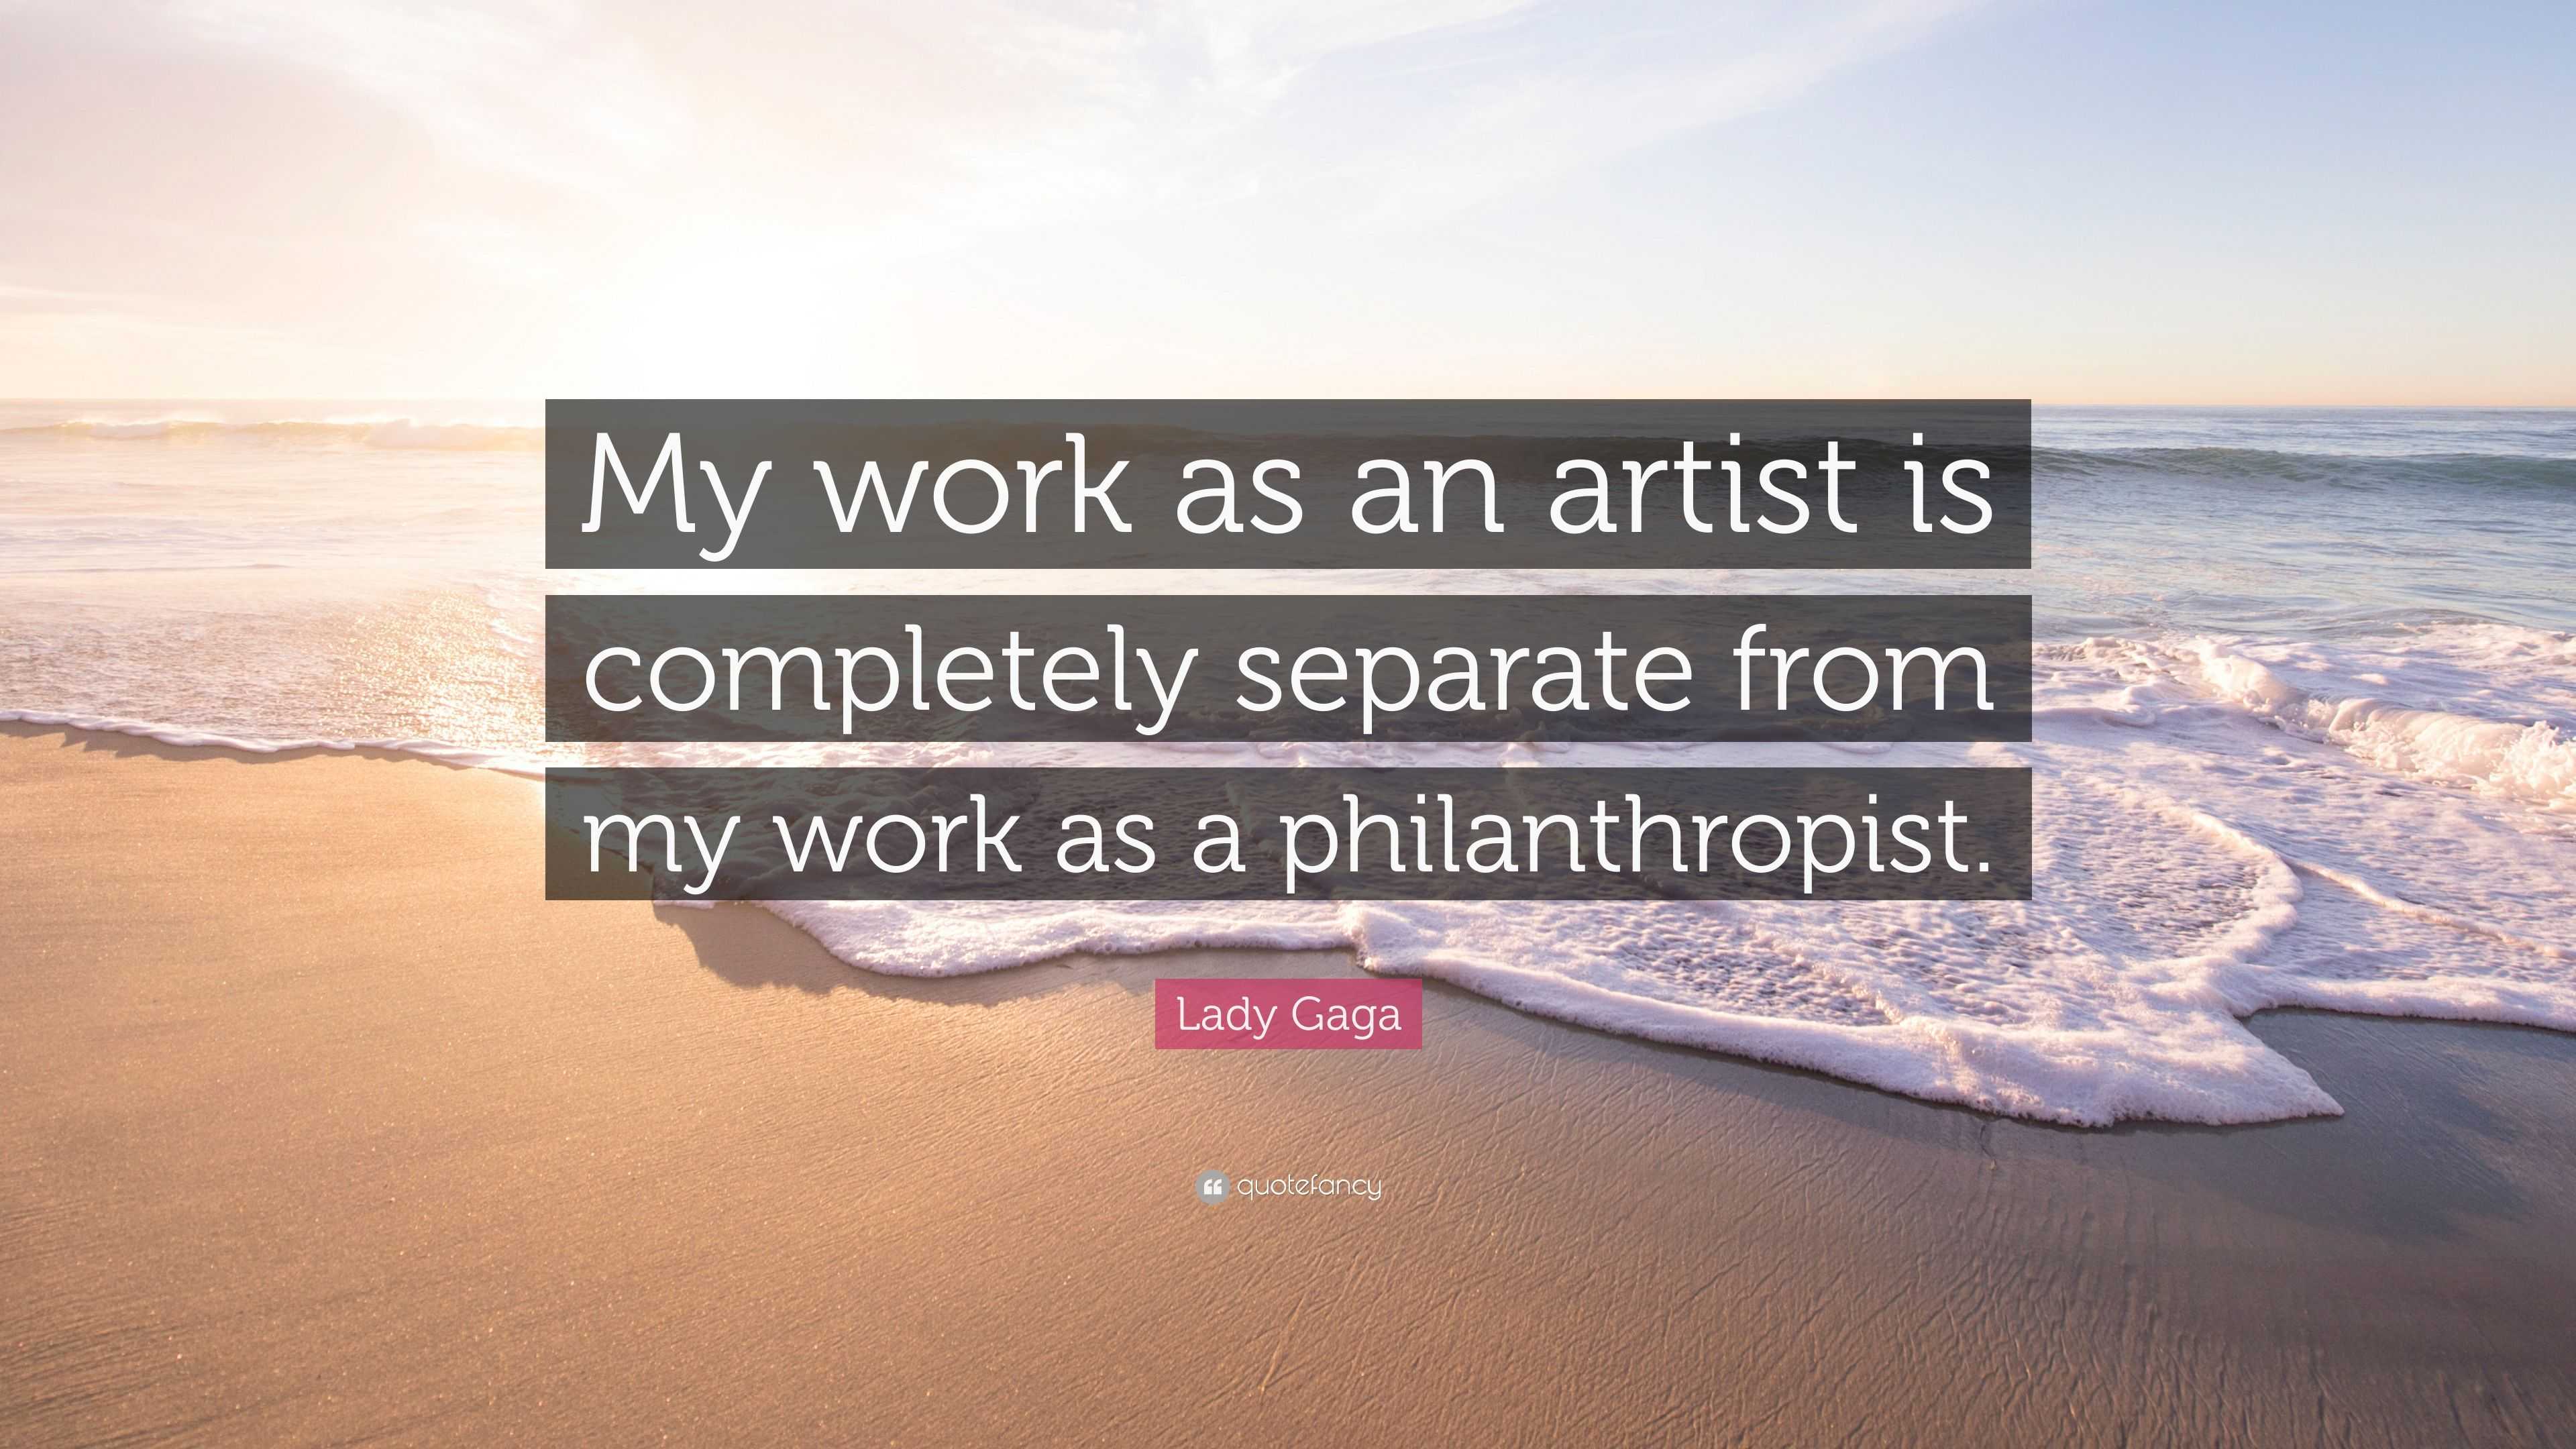 Lady Gaga Quote: “My work as an artist is completely separate from my